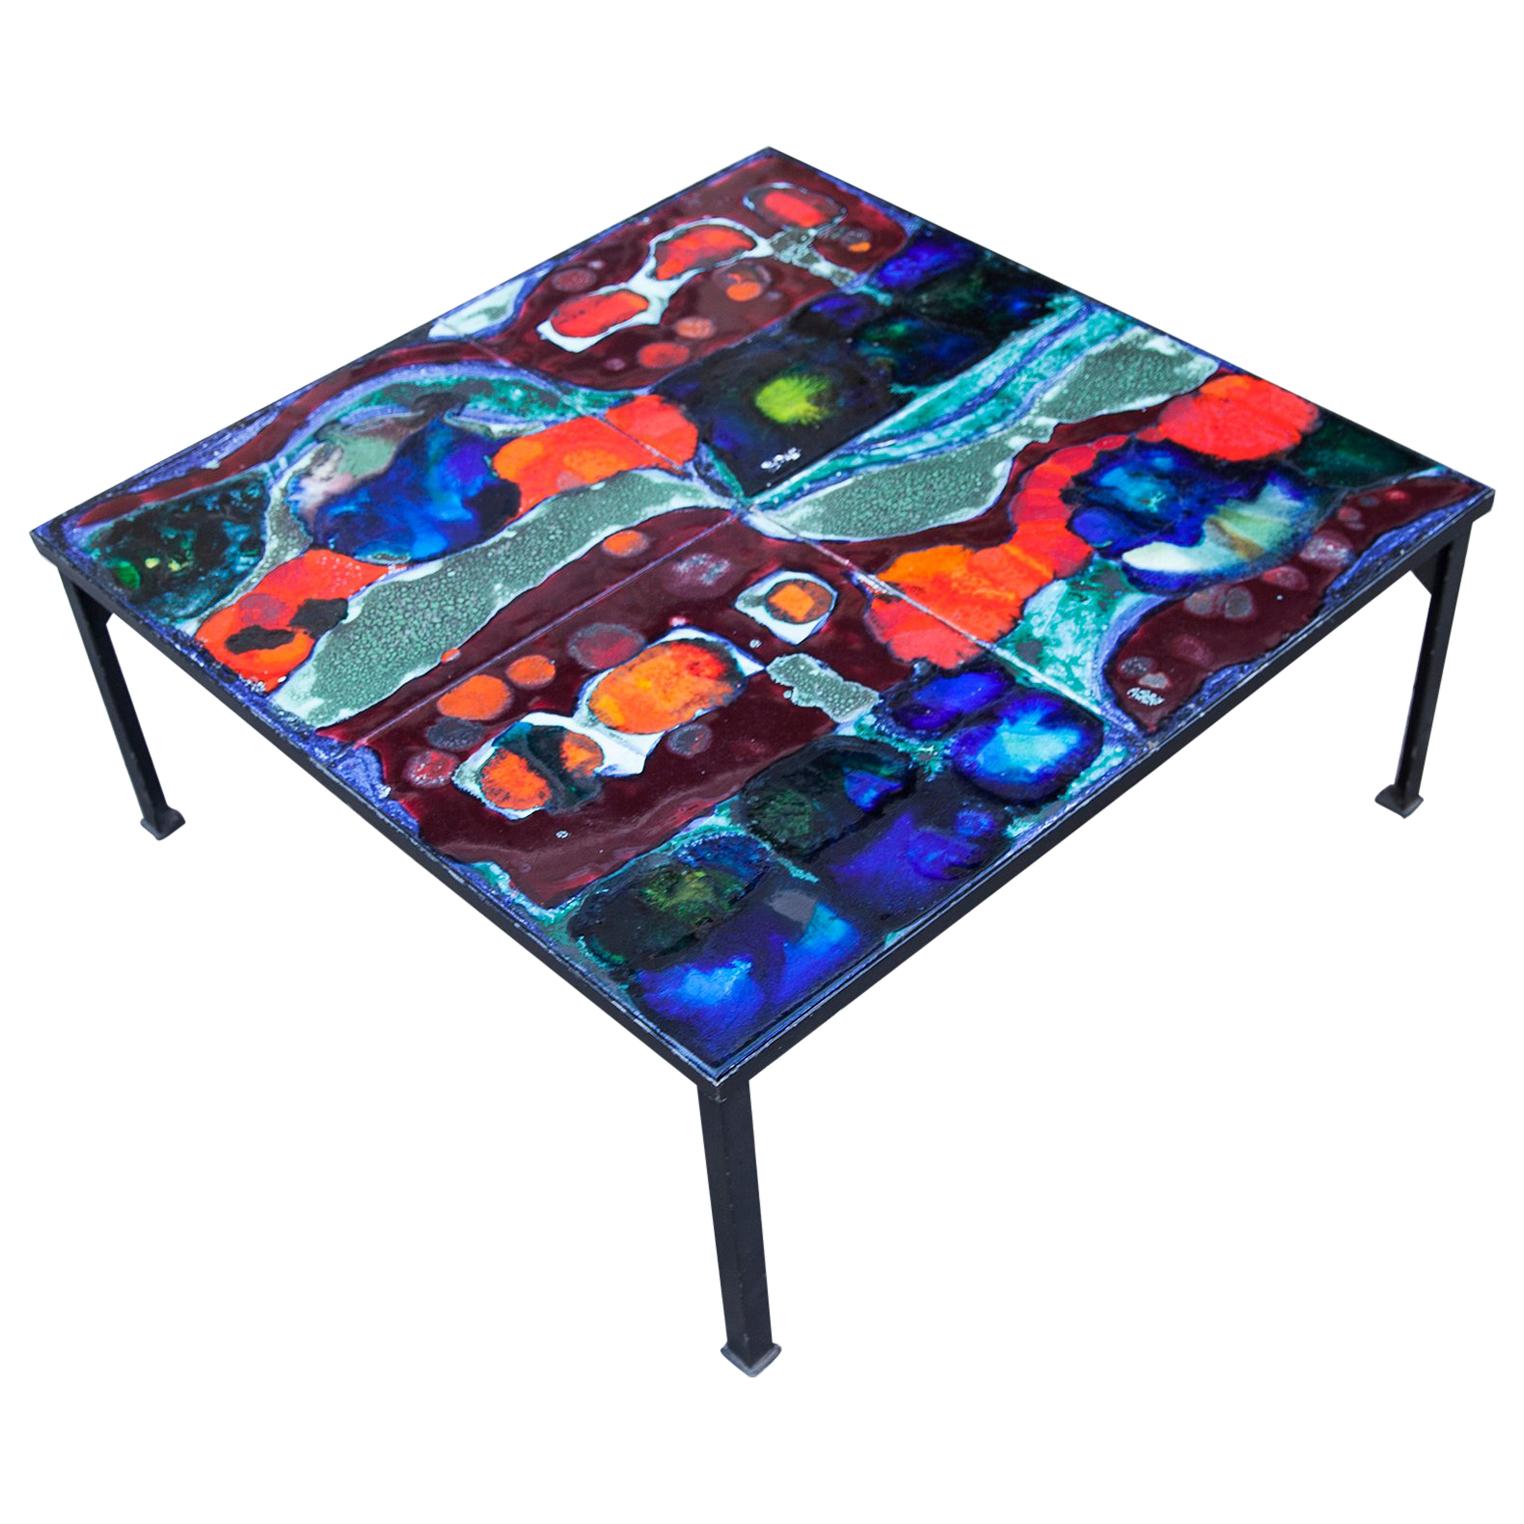 Hanns Altmeier Colorful Ceramic Square Coffee Table, Germany, 1960 For Sale